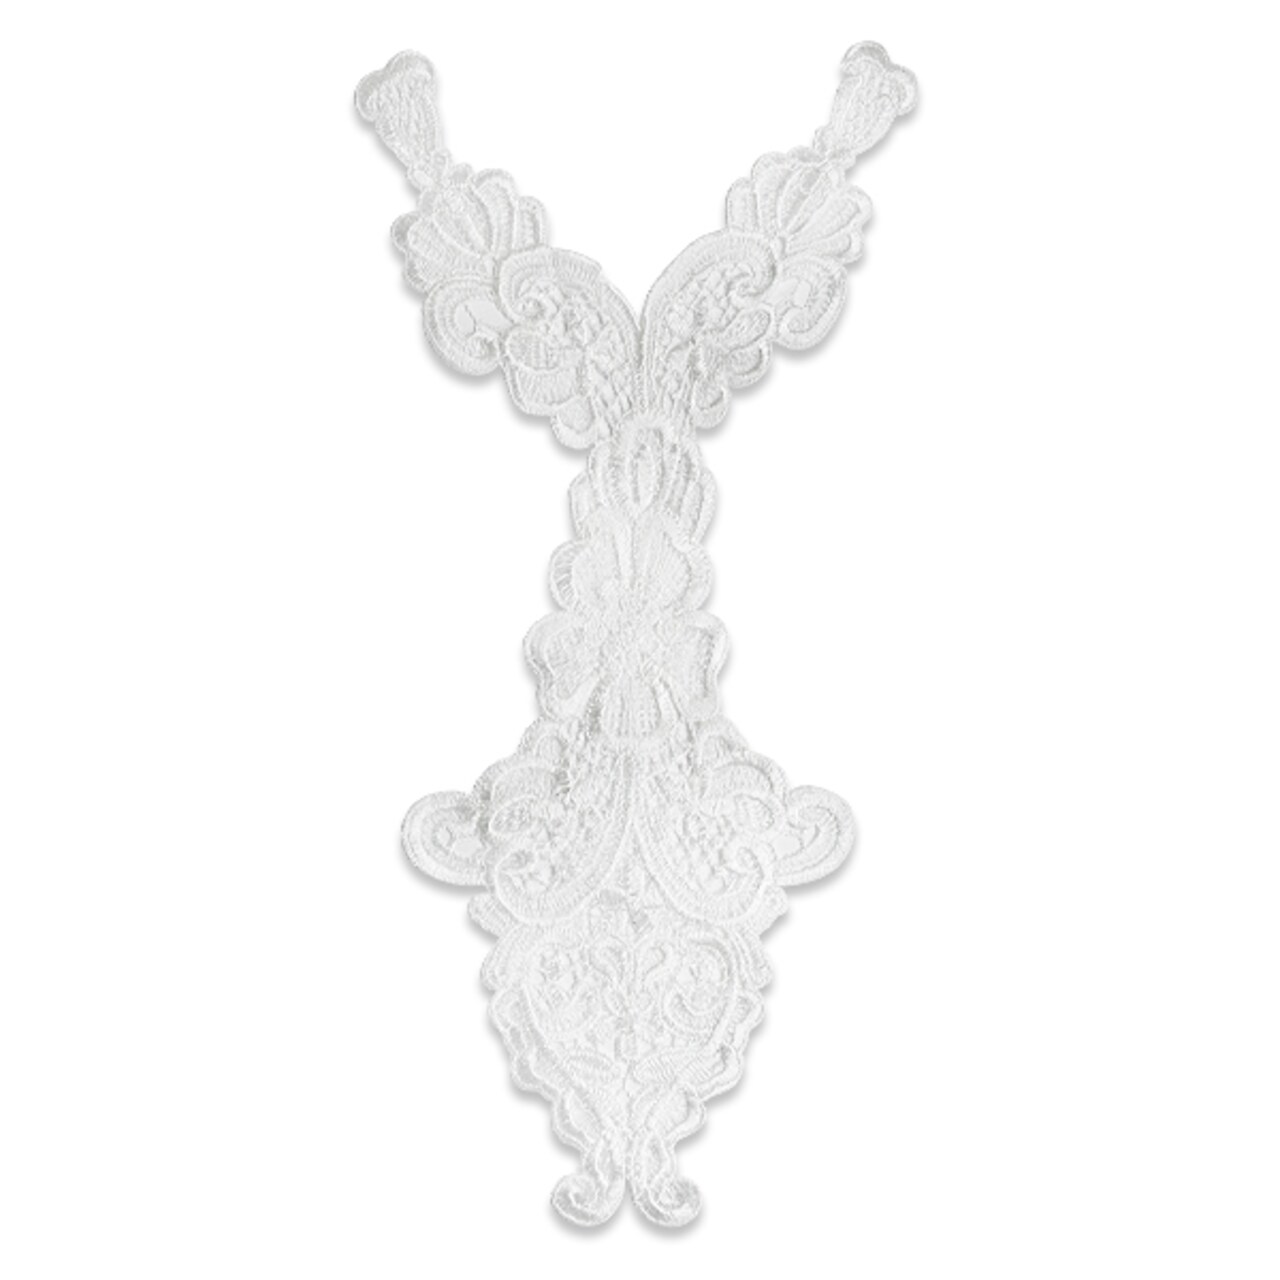 Long Embroidery Lace Collar For Neckline